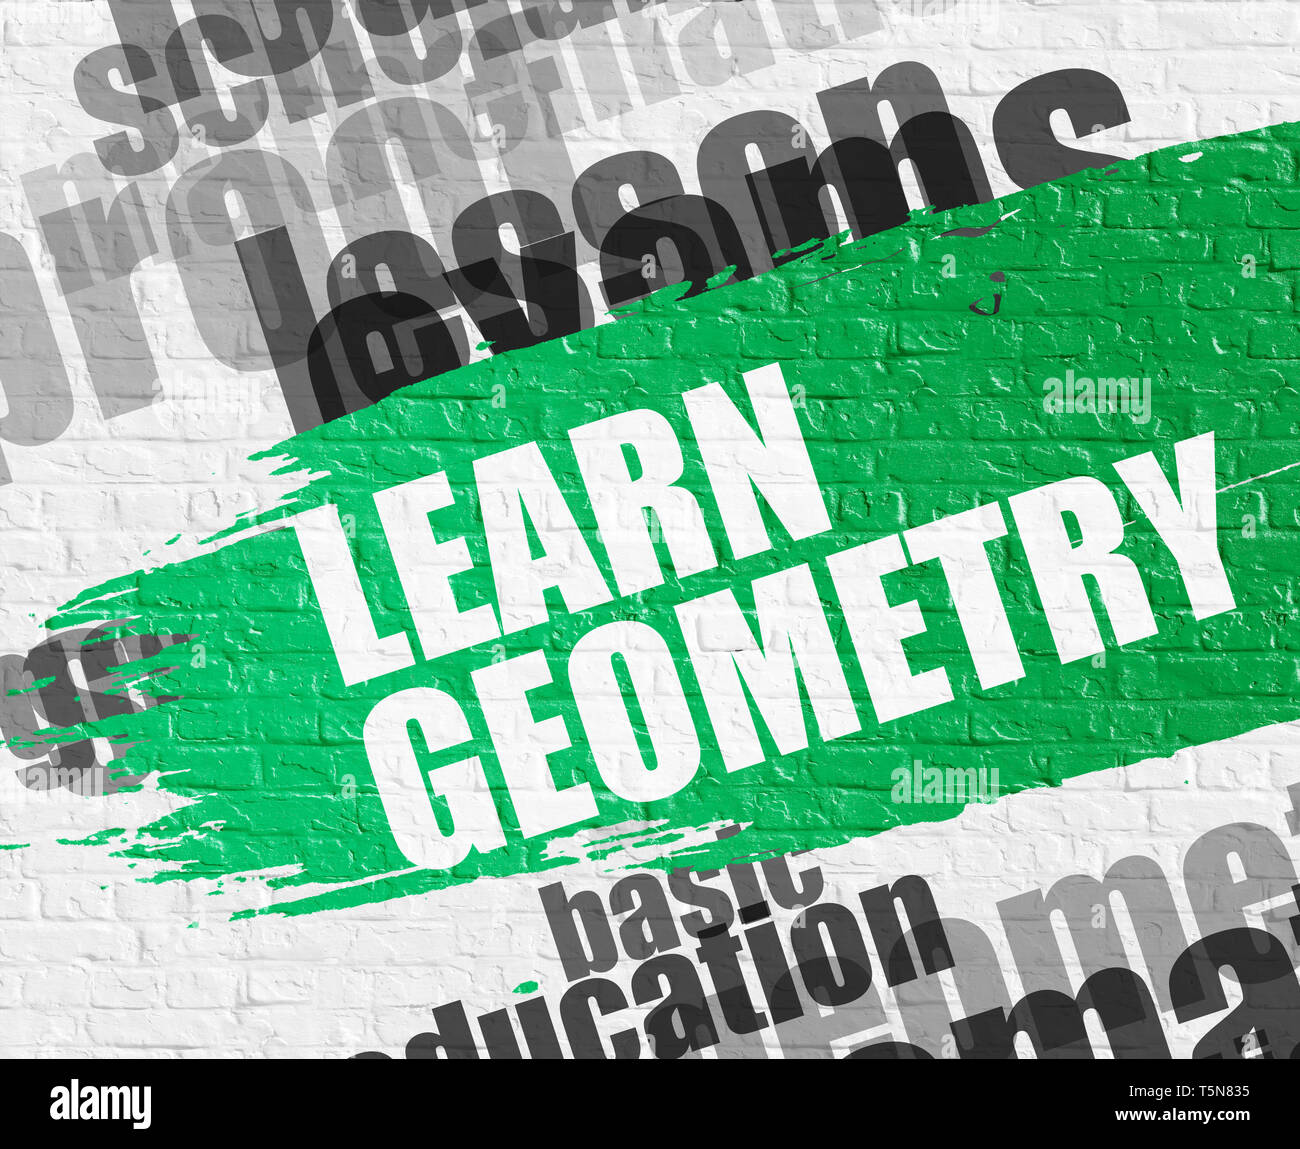 Business Education Concept: Learn Geometry on the White Brick Wall Background with Wordcloud Around It. Learn Geometry - on Brick Wall with Word Cloud Stock Photo